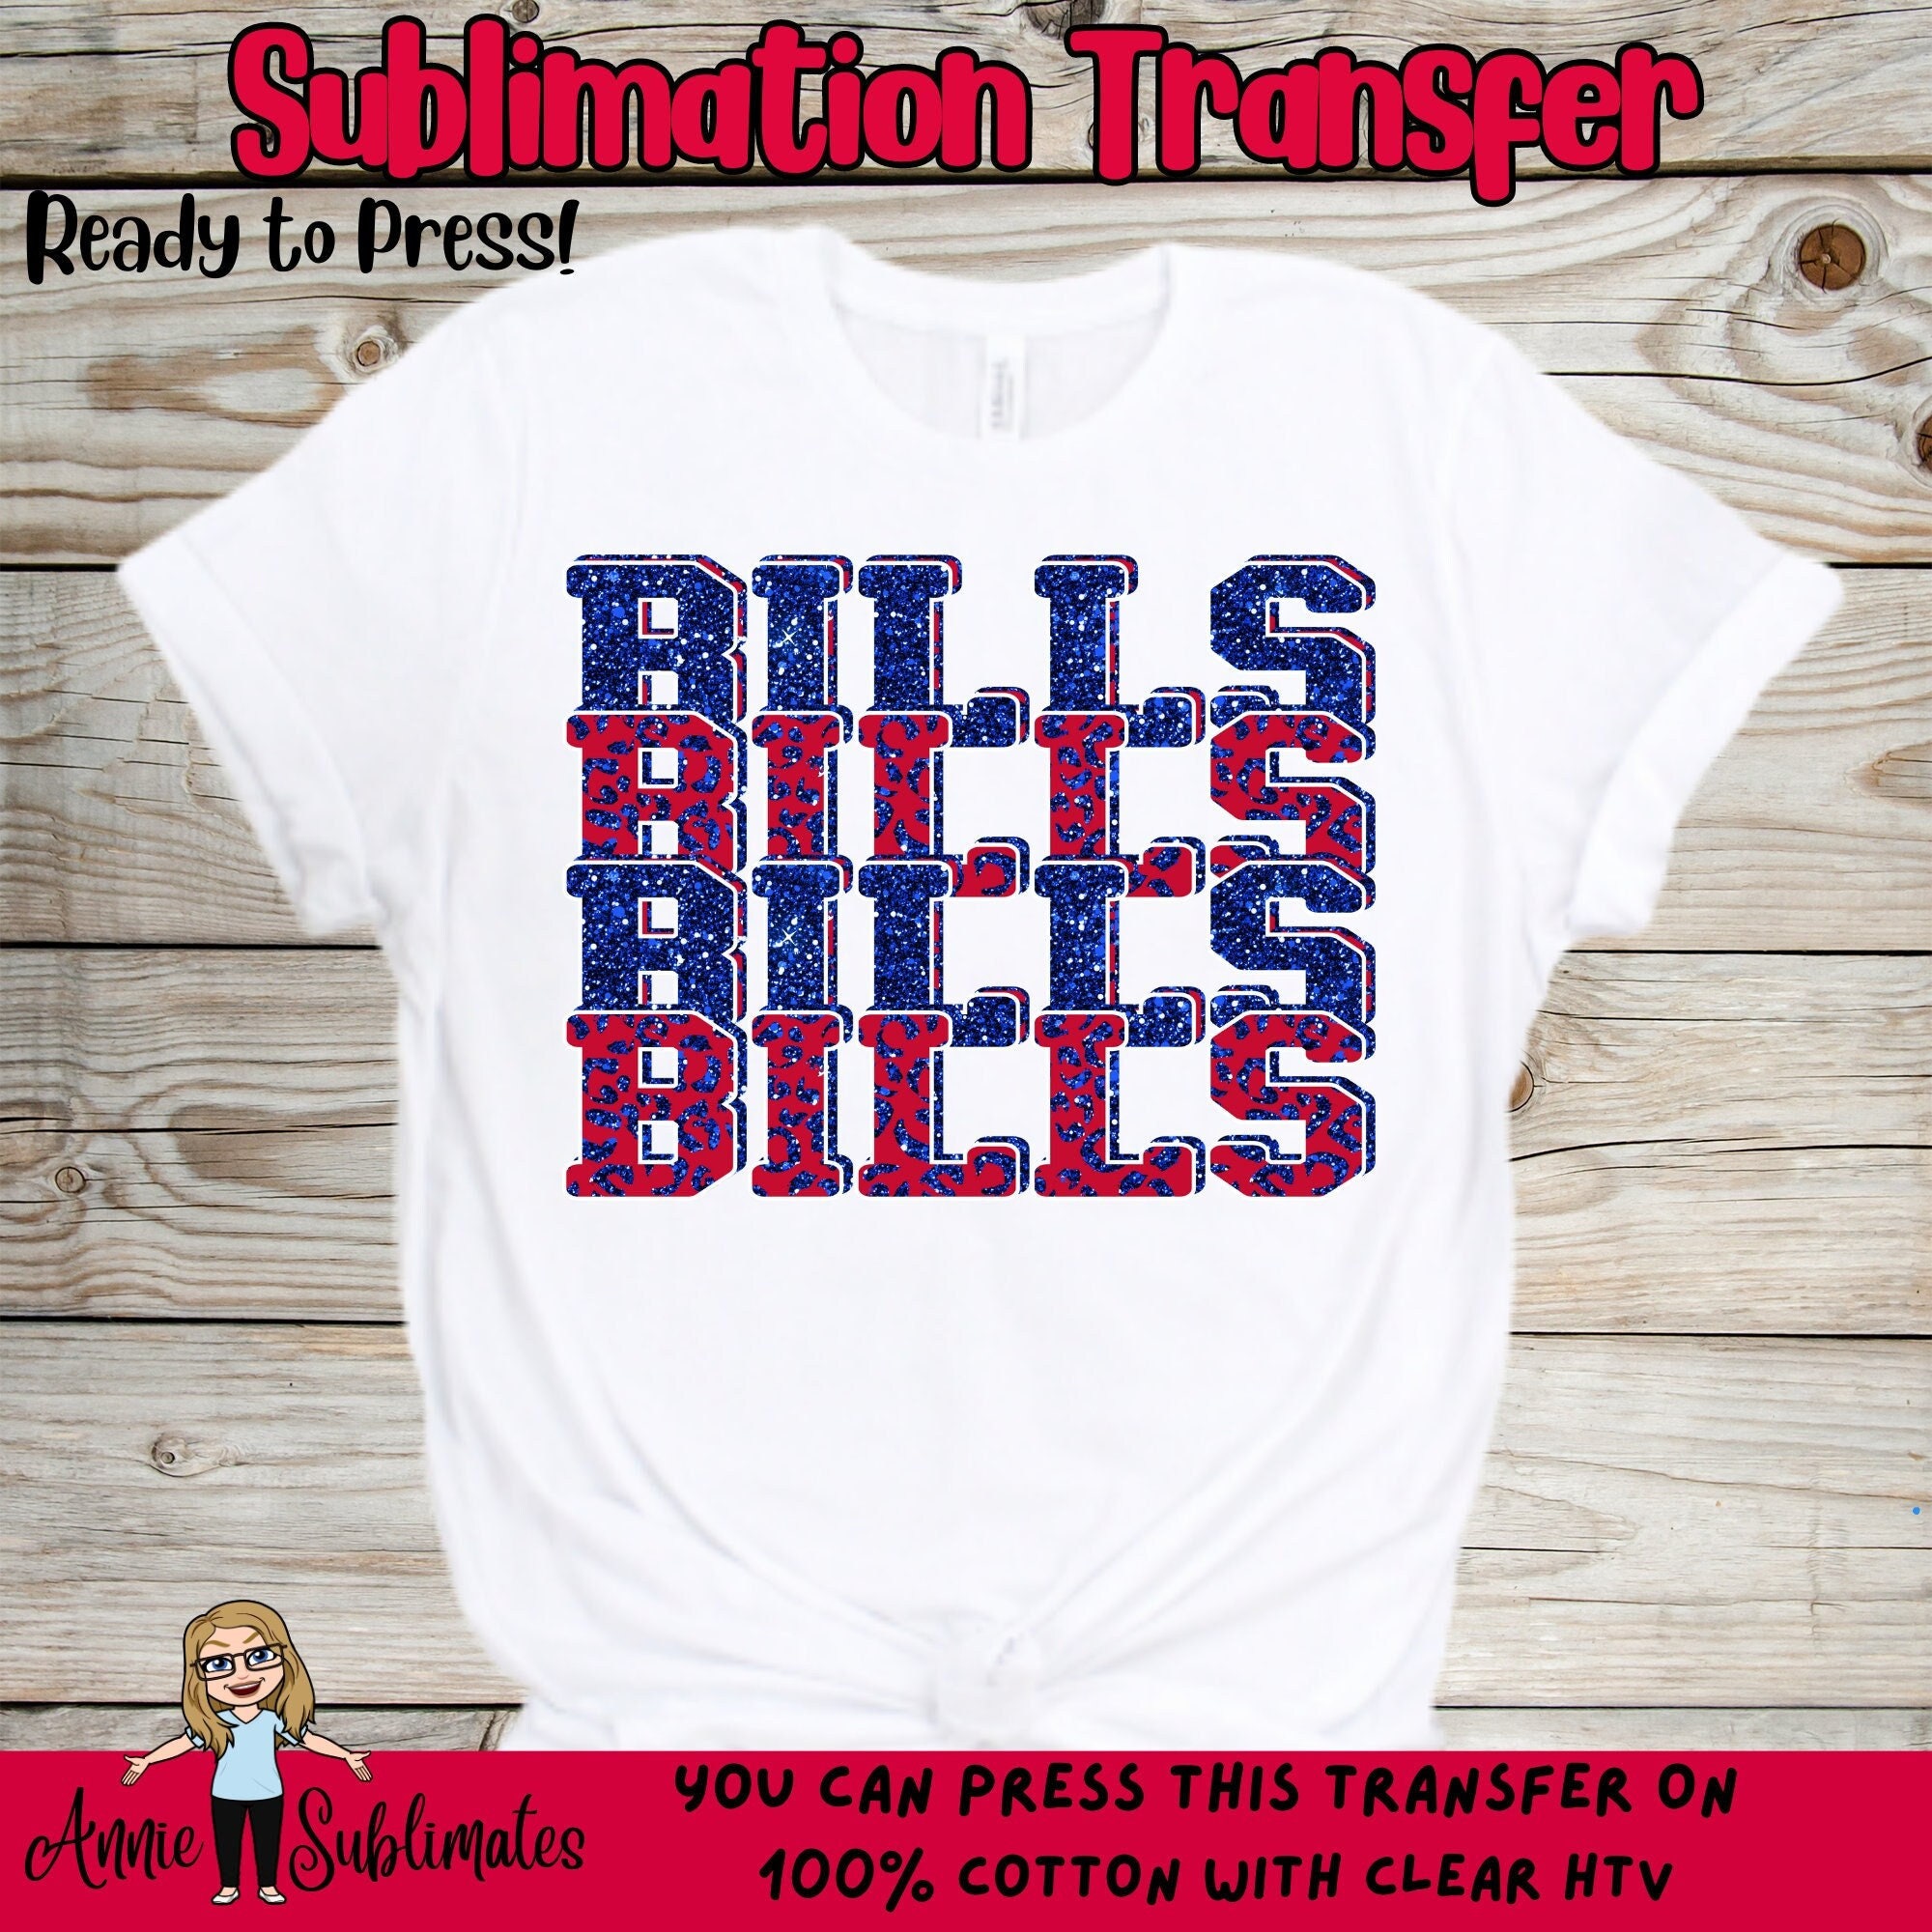 Buffalo Bills NFL Football Patches Iron on, Sew(Select options)✈Thai by USPS